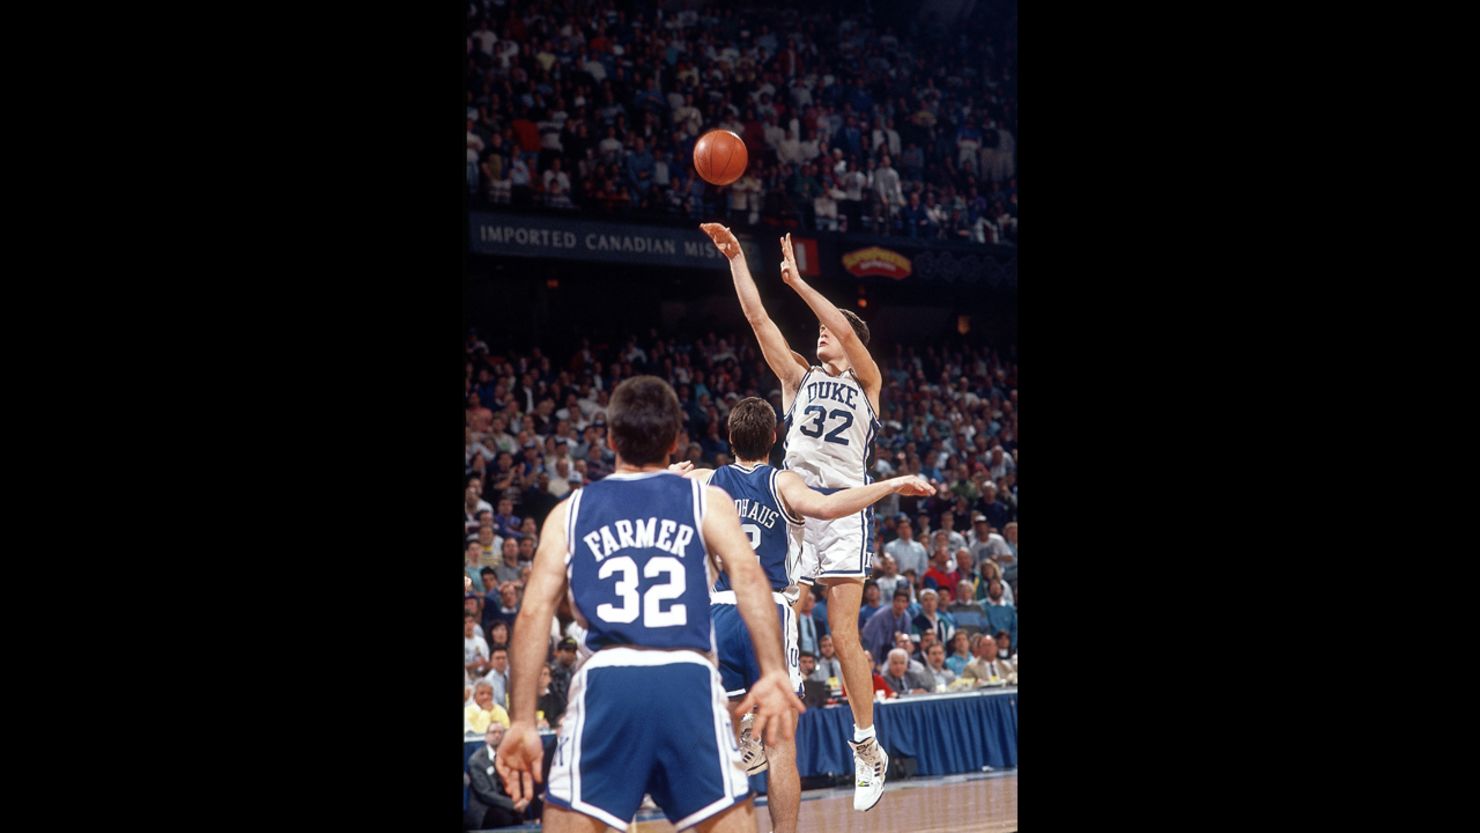 Duke's Christian Laettner hit the game-winning shot against Kentucky in 1992 as time expired. Minutes earlier, he had stomped on Kentucky's Aminu Timberlake, and many feel he should have been ejected. 
